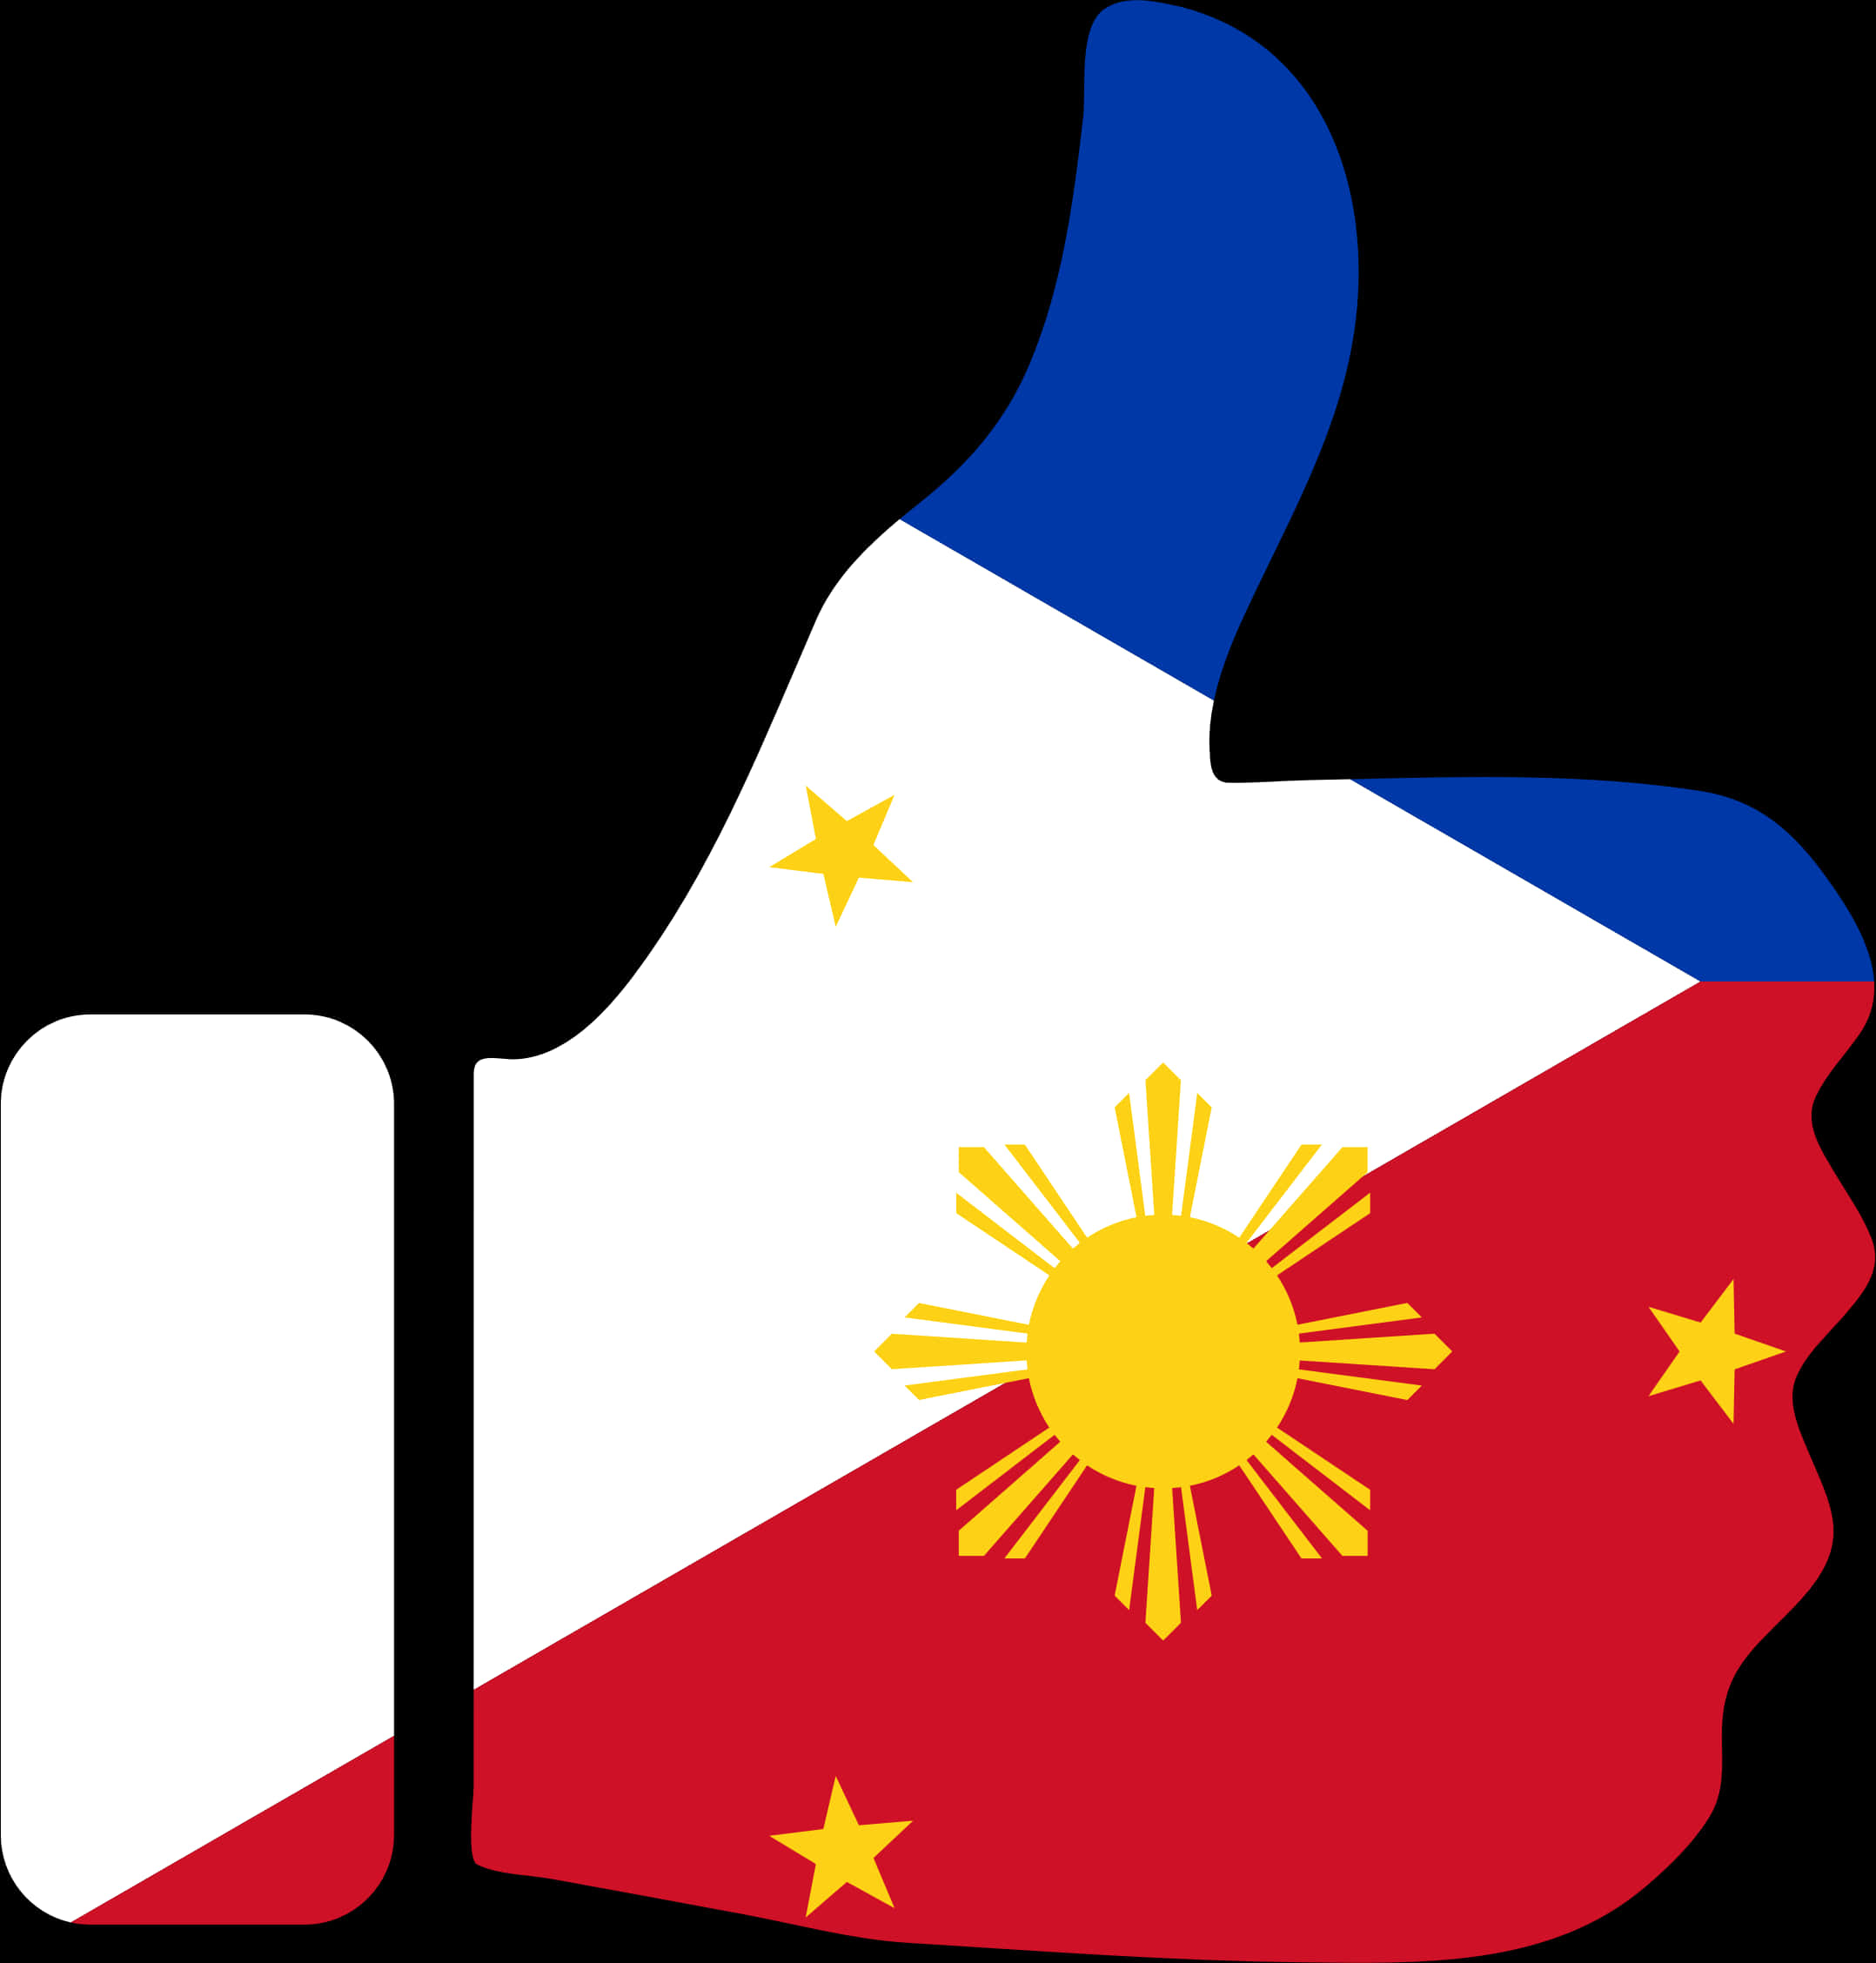 Philippine Flag Thumbs Up Graphic